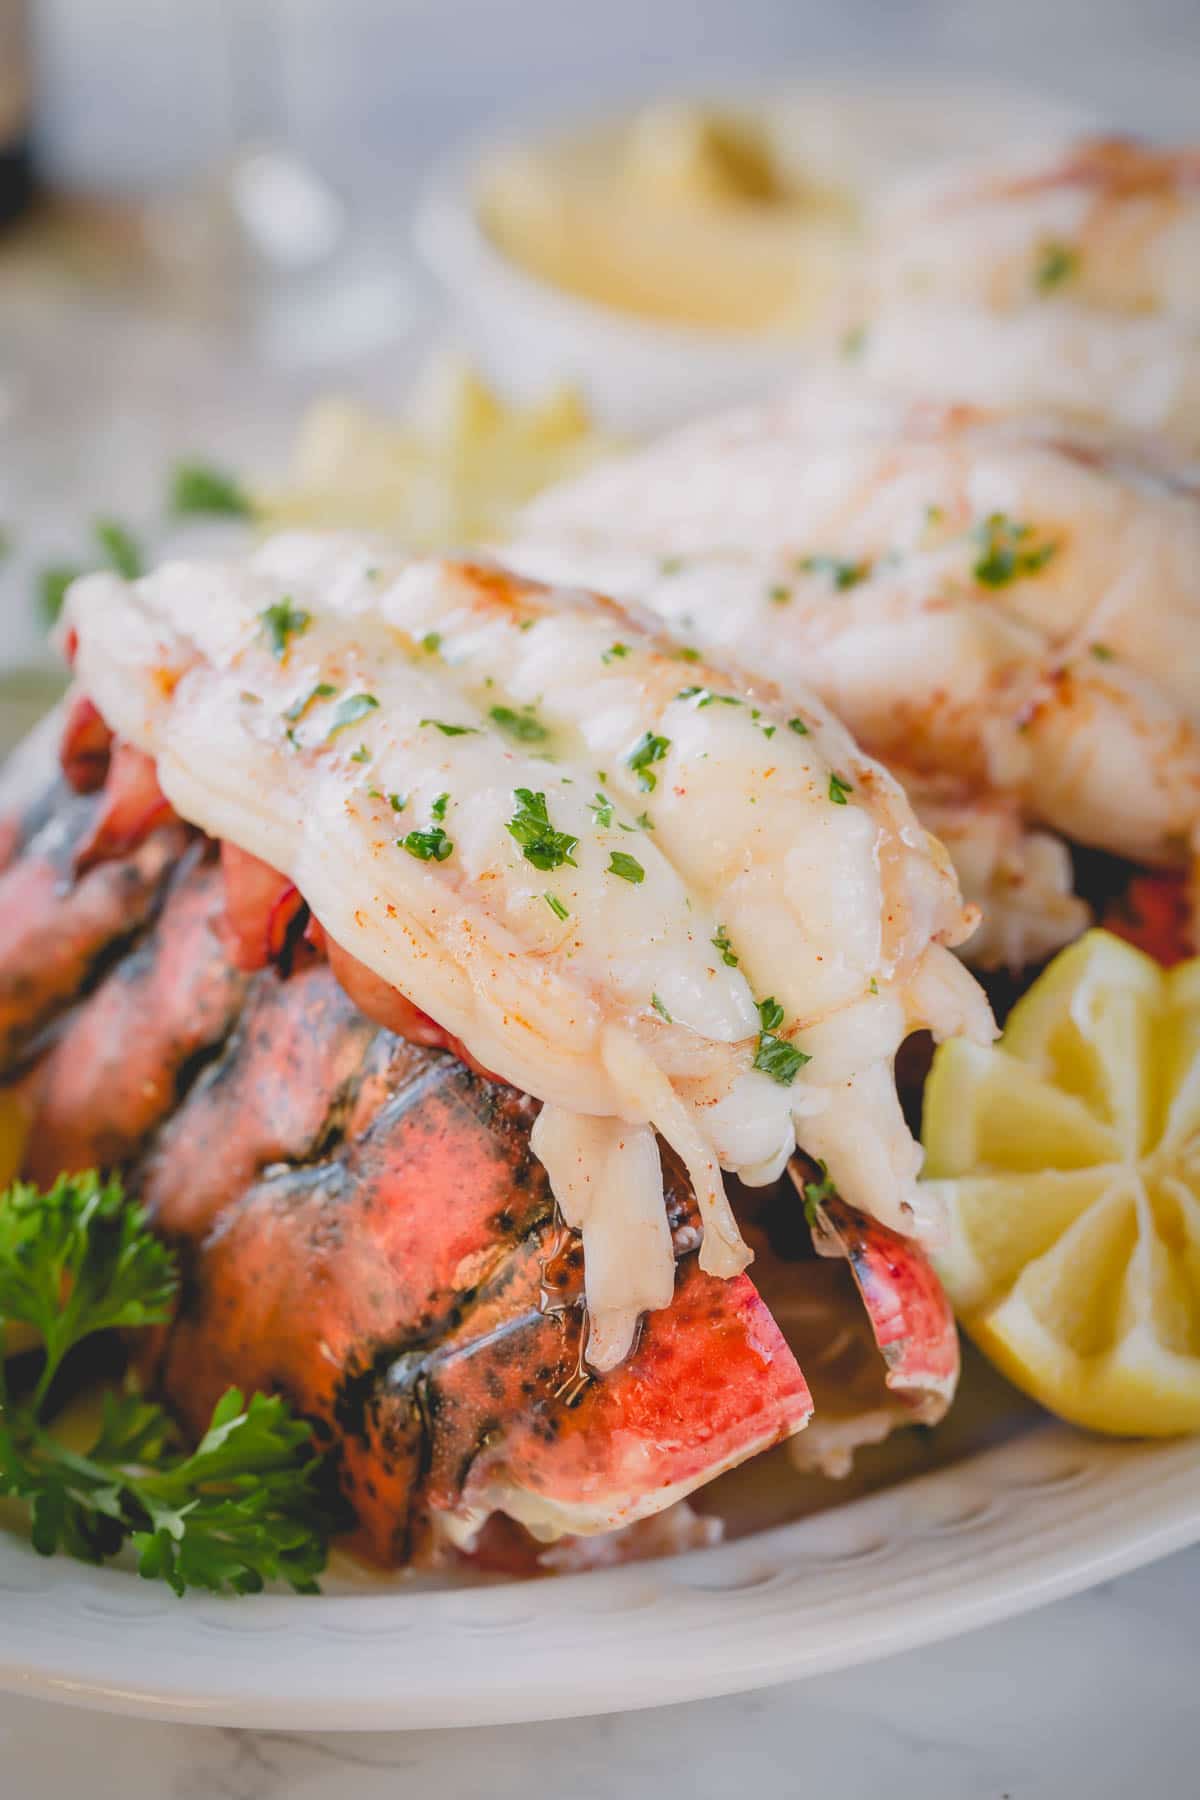 A baked lobster tail on its shell.